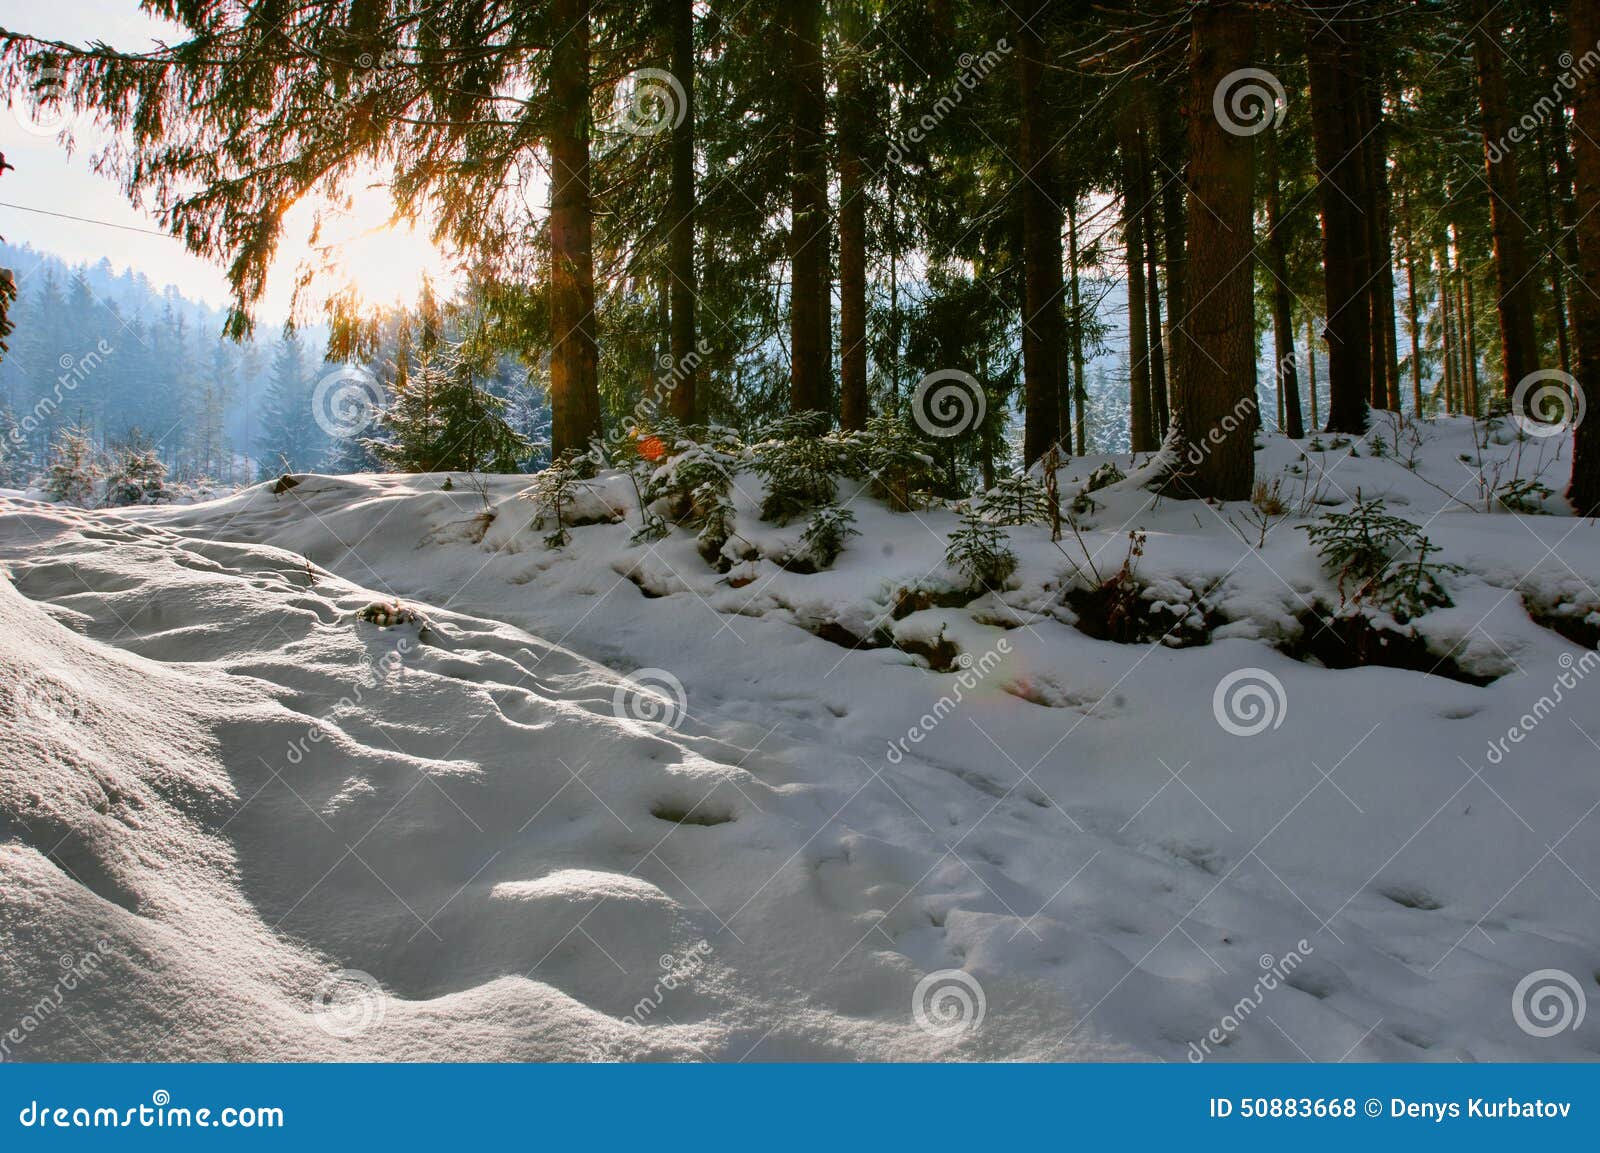 Snow covered path stock photo. Image of frozen, forest - 50883668